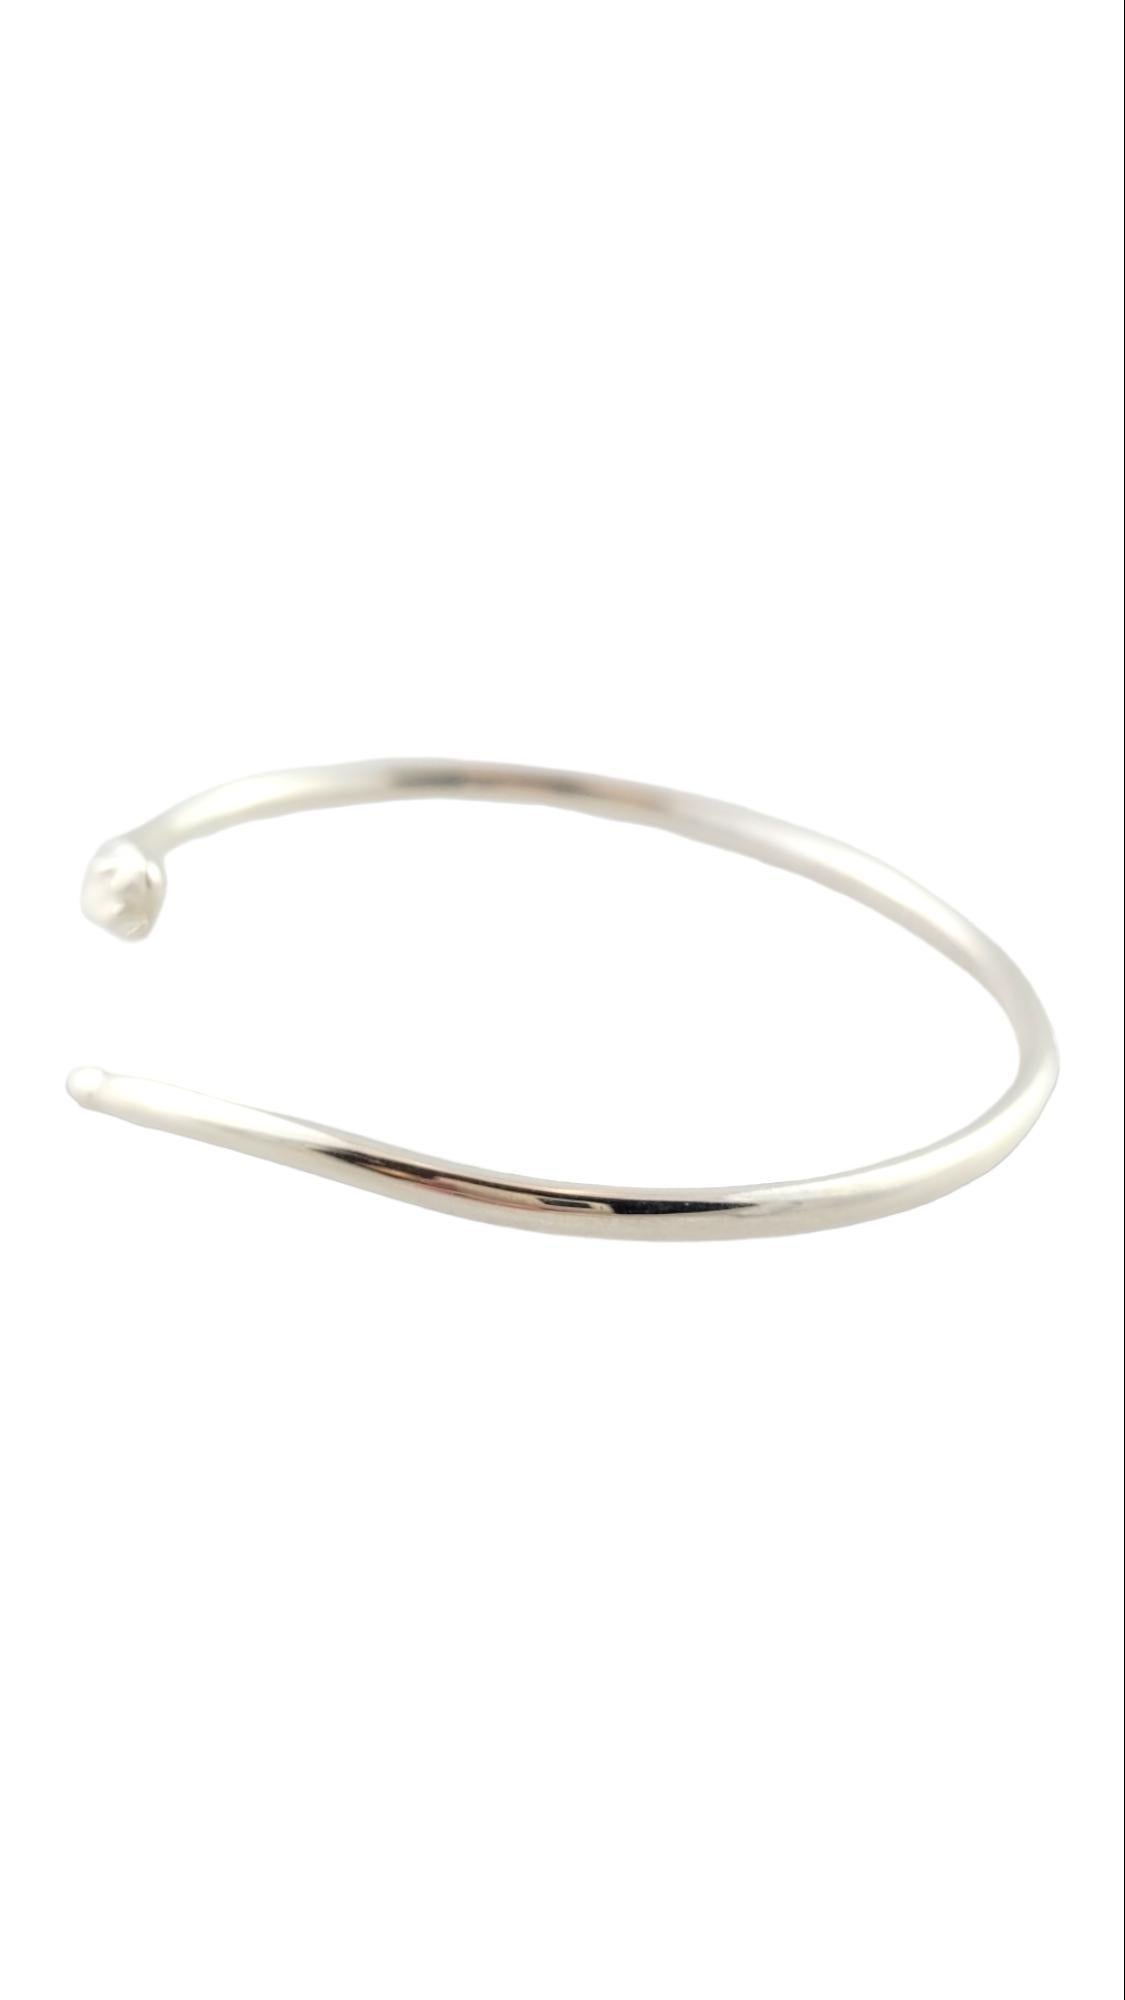 Tiffany & Co. Sterling Silver Elsa Peretti Snake Bangle Bracelet w/ Tiffany Box 

This gorgeous Tiffany & Co Elsa Peretti bangle bracelet is crafted from 925 sterling silver and has a beautiful snake design!

Size: 8